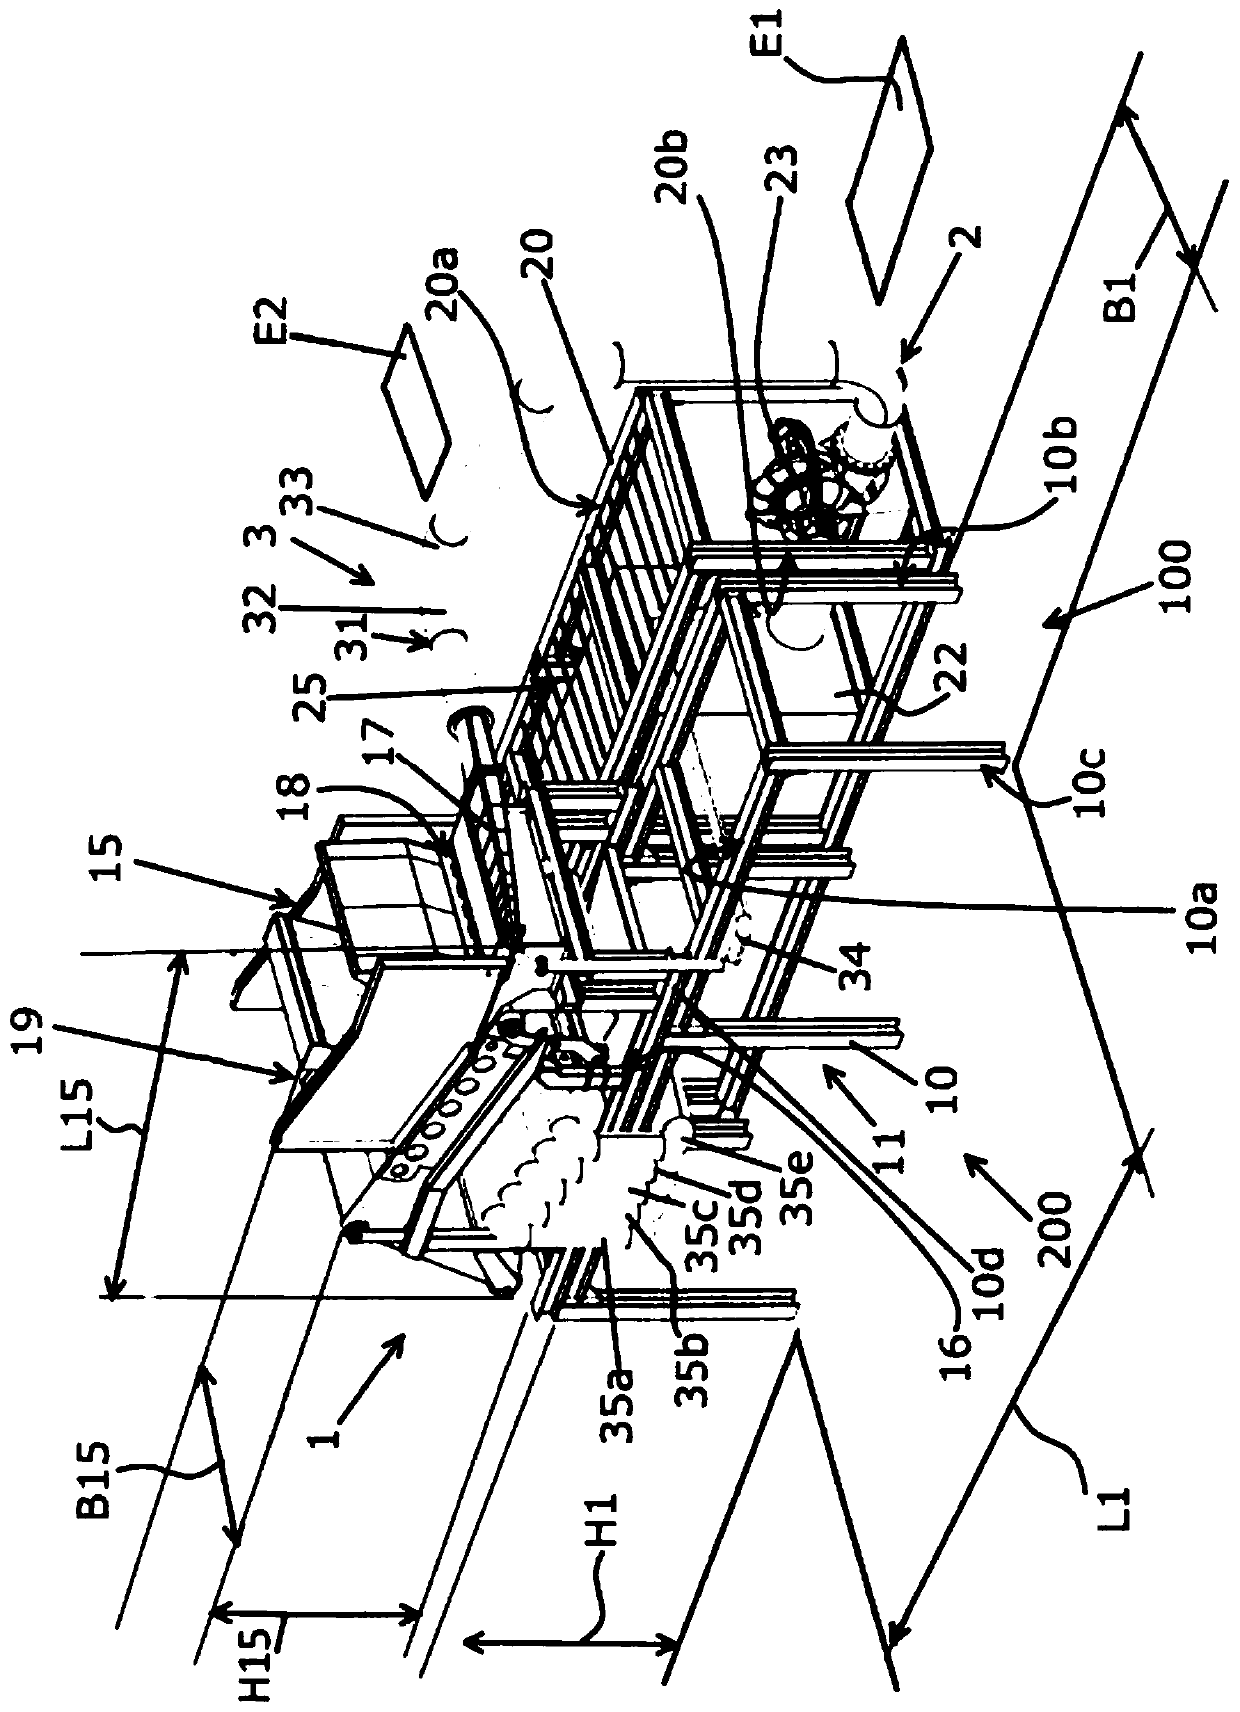 Device for producing nonwoven webs and method for assembling such device